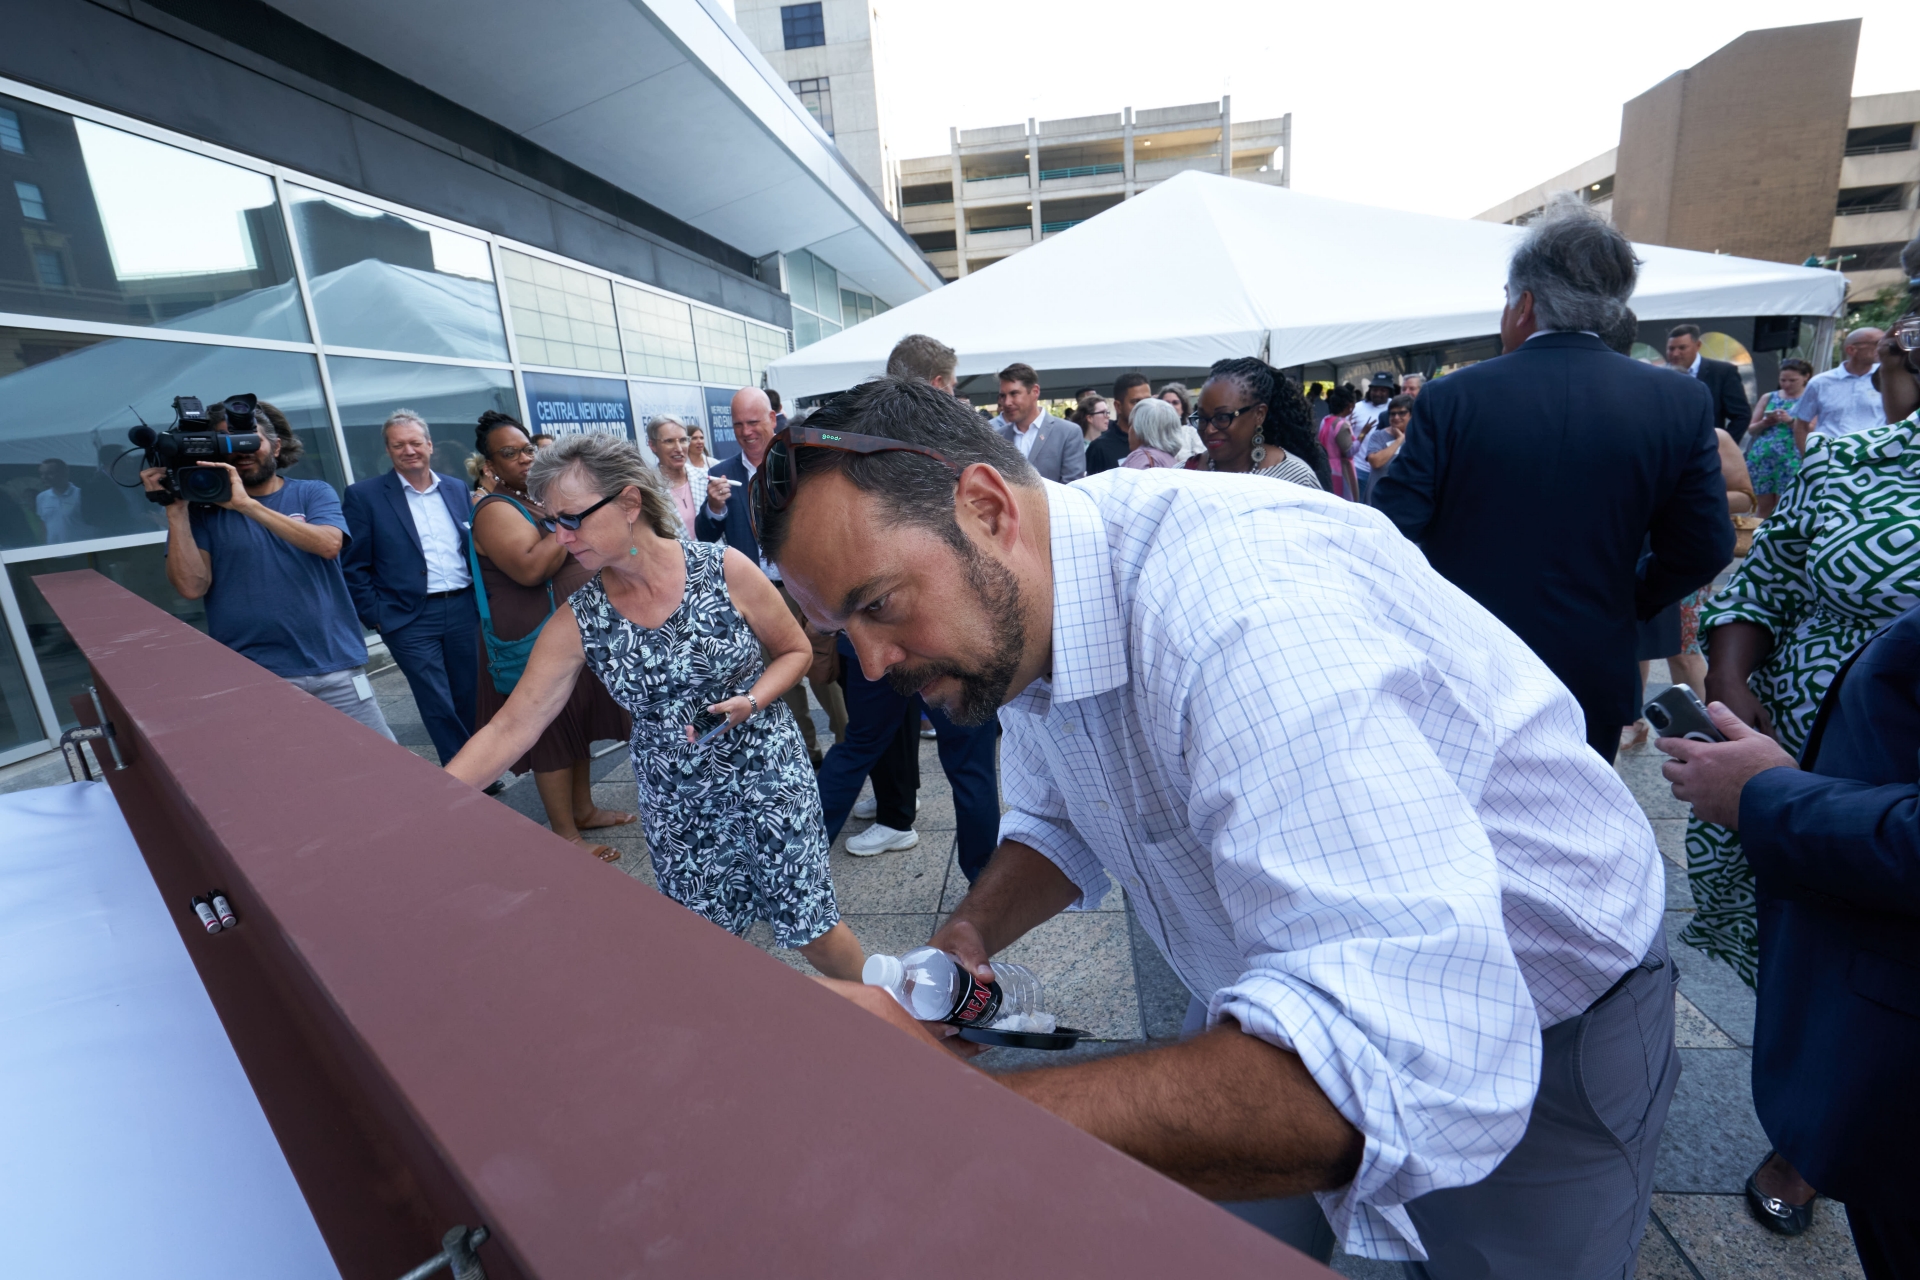 CenterState CEO's Dominic Robinson and Lori Dietz sign a steel beam at The Tech Garden Expansion Kickoff.